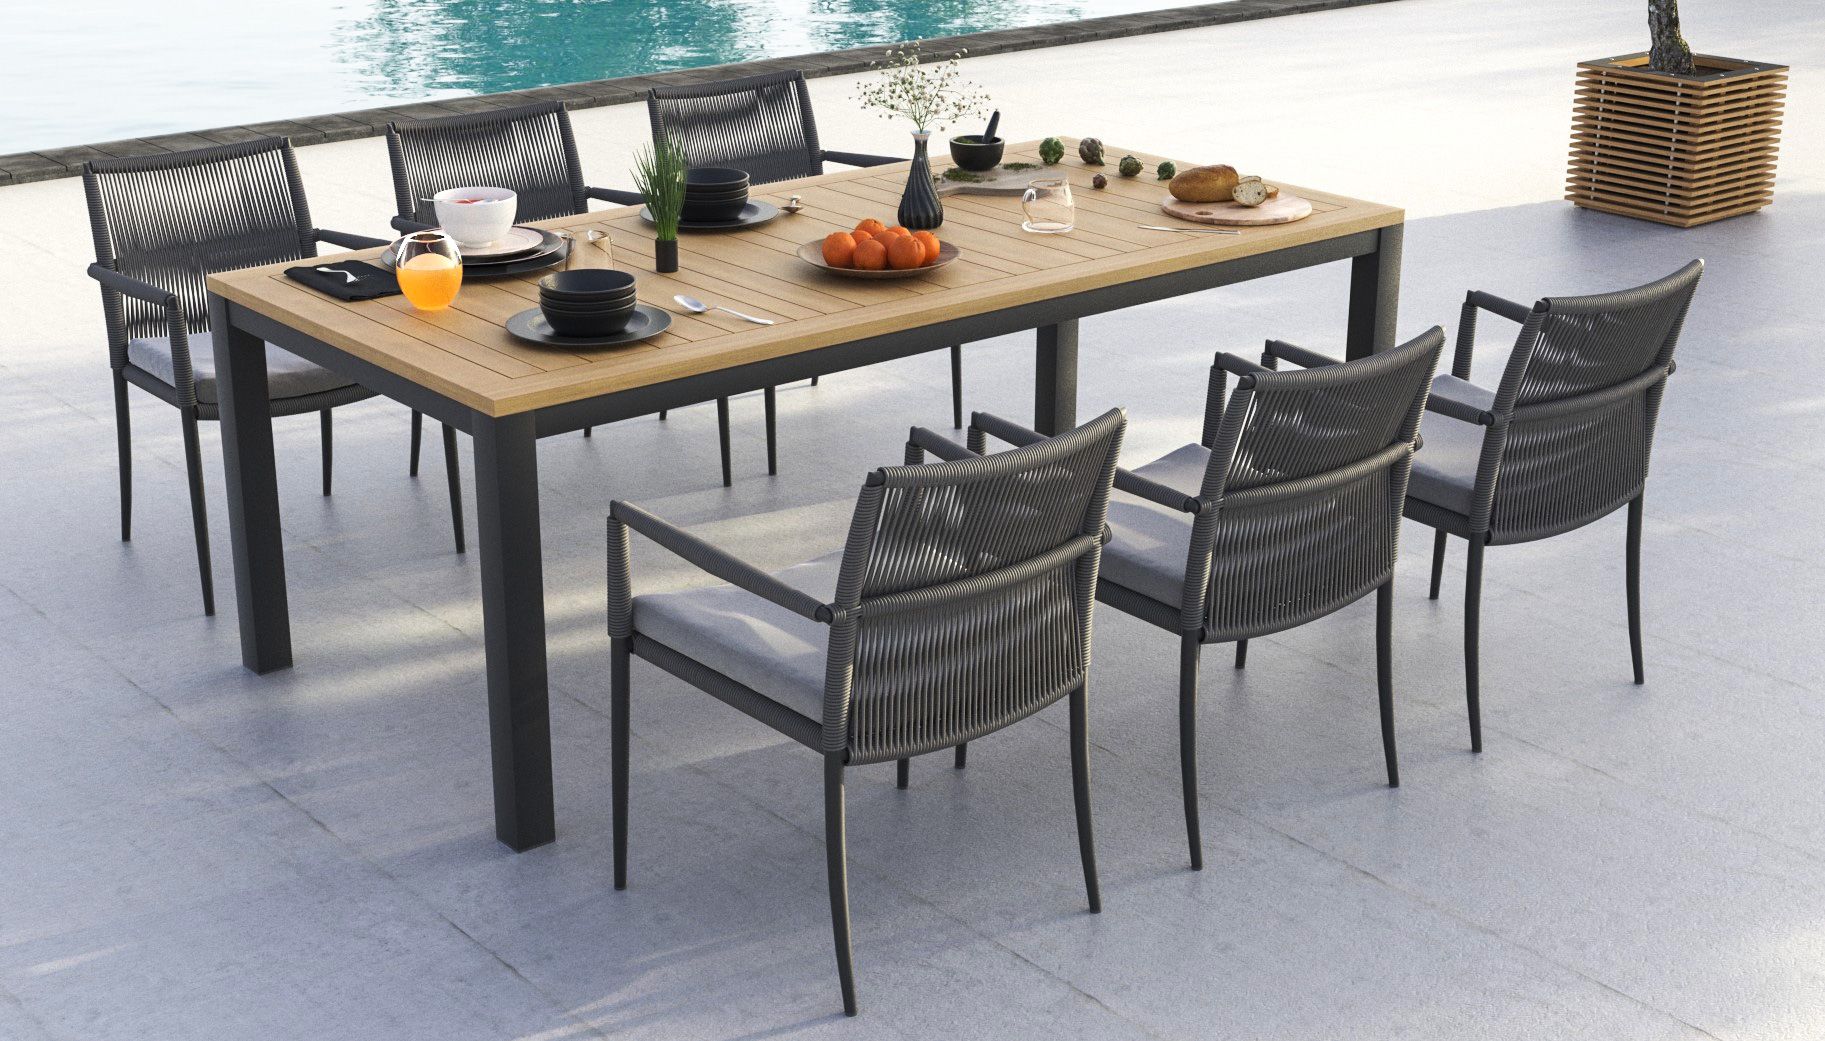 Geviner Dining Table With Cario Chairs, 10 Seater Round Outdoor Dining Table